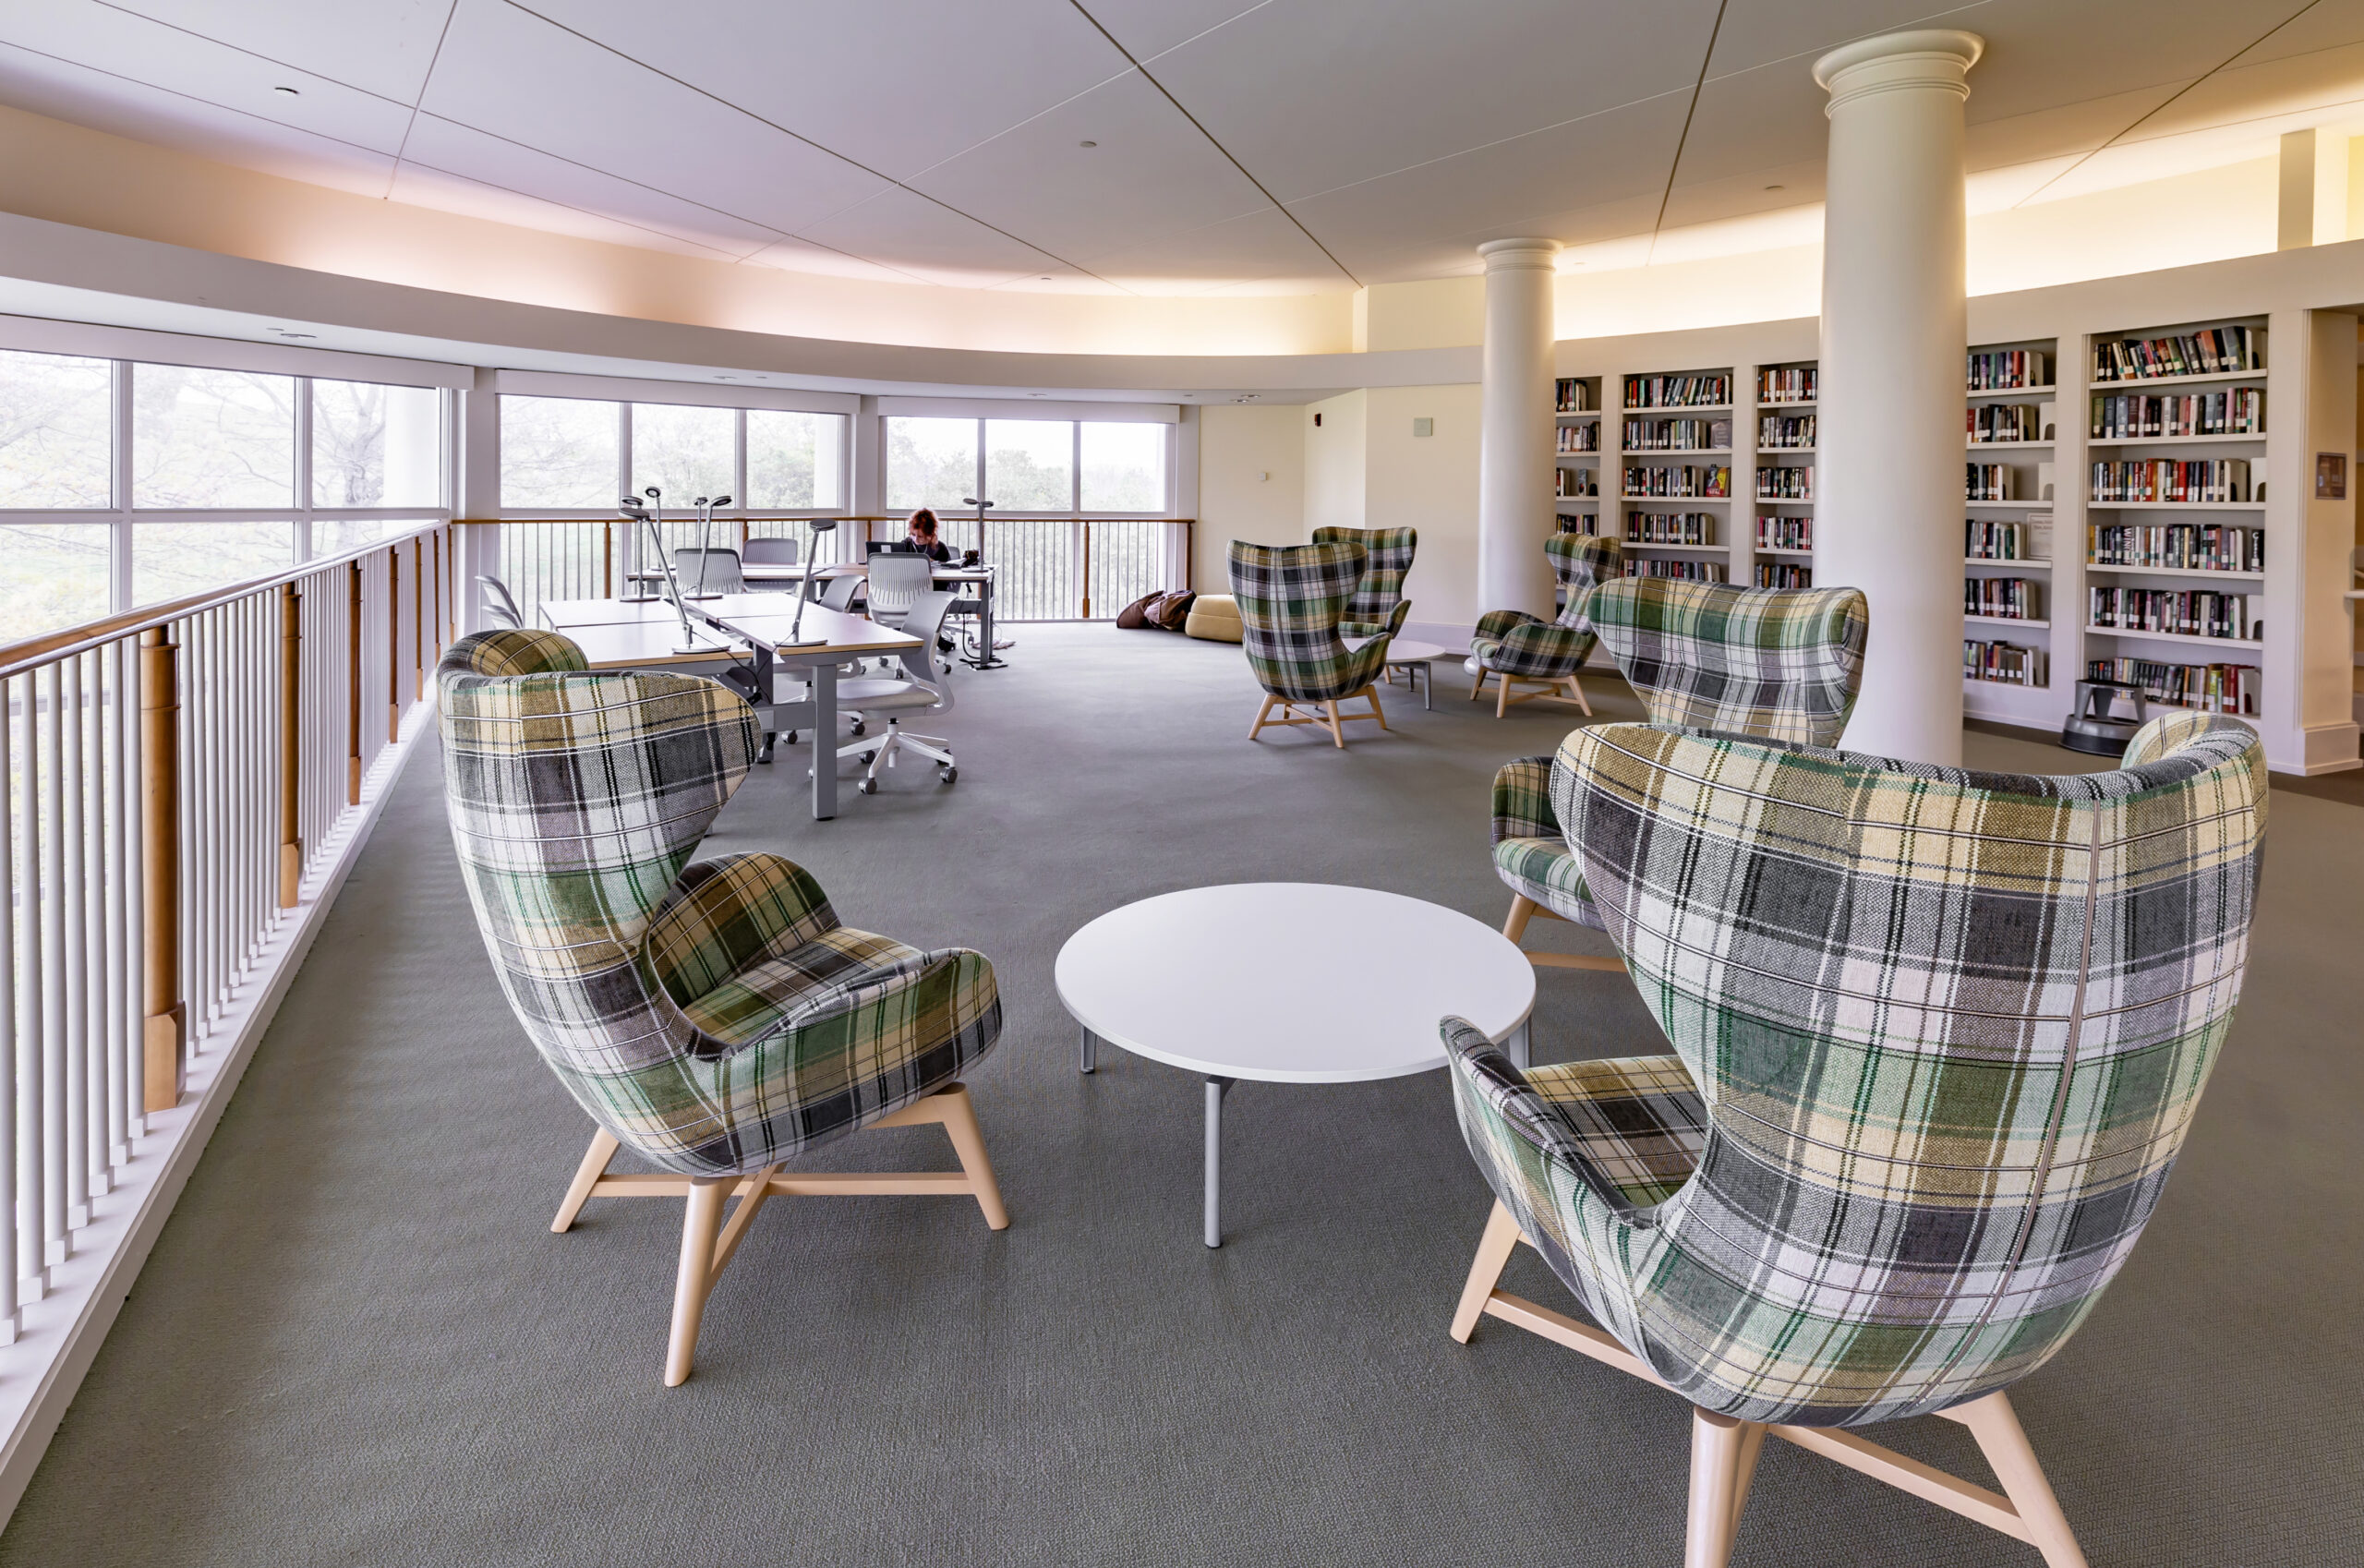 Hollins University Library reading room loft with bookshelves and plaid armchairs